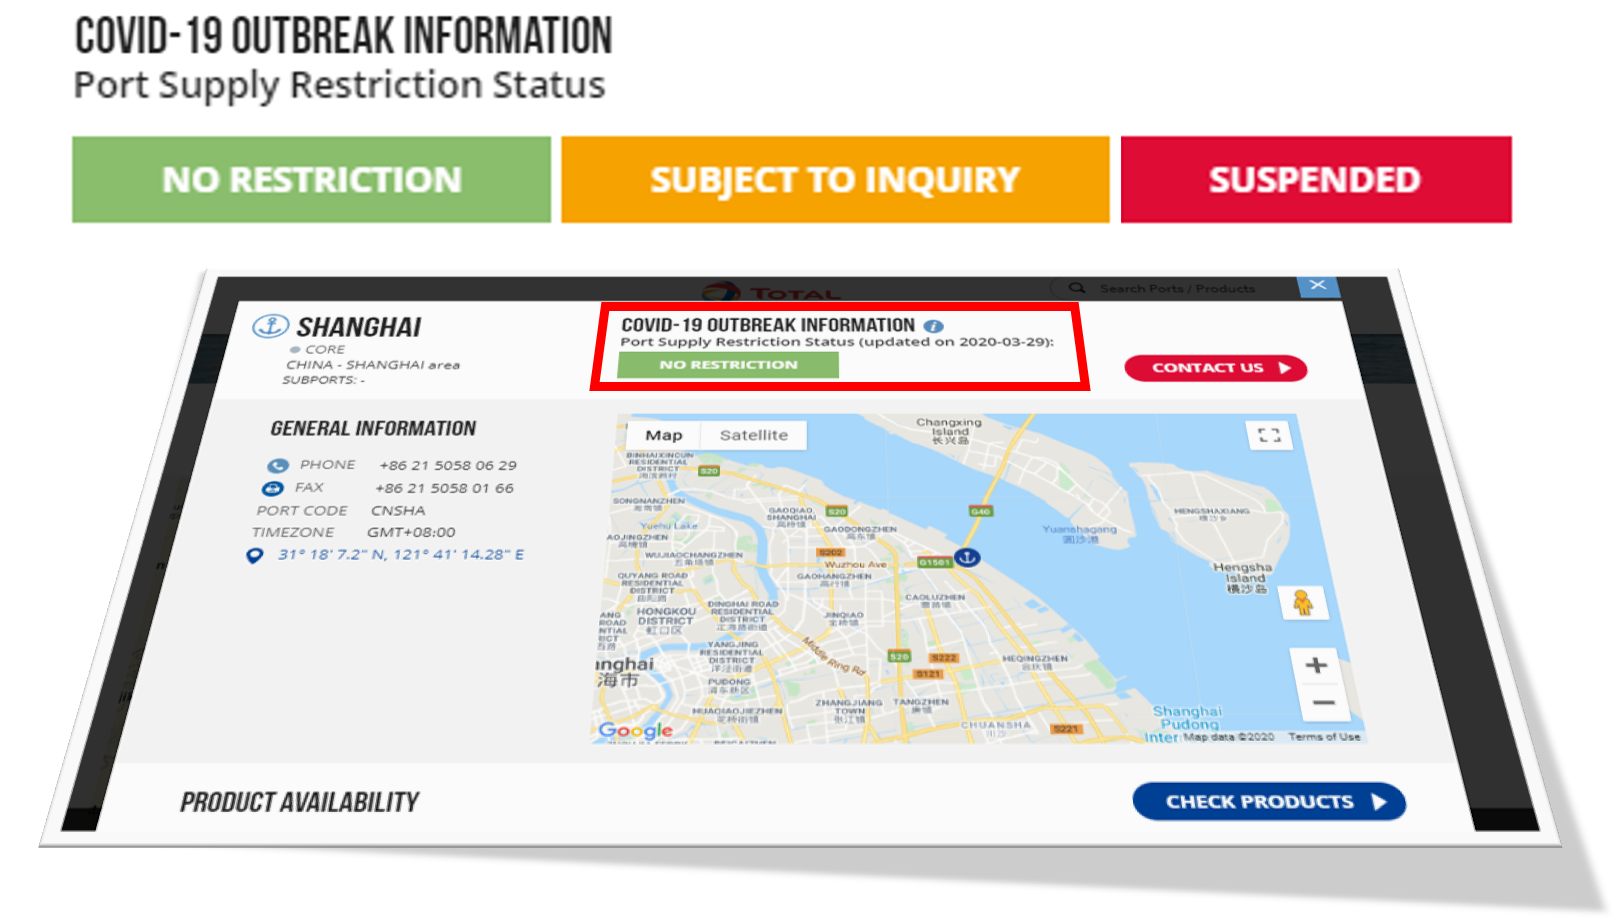 Port Supply Restrictions Information now available on website